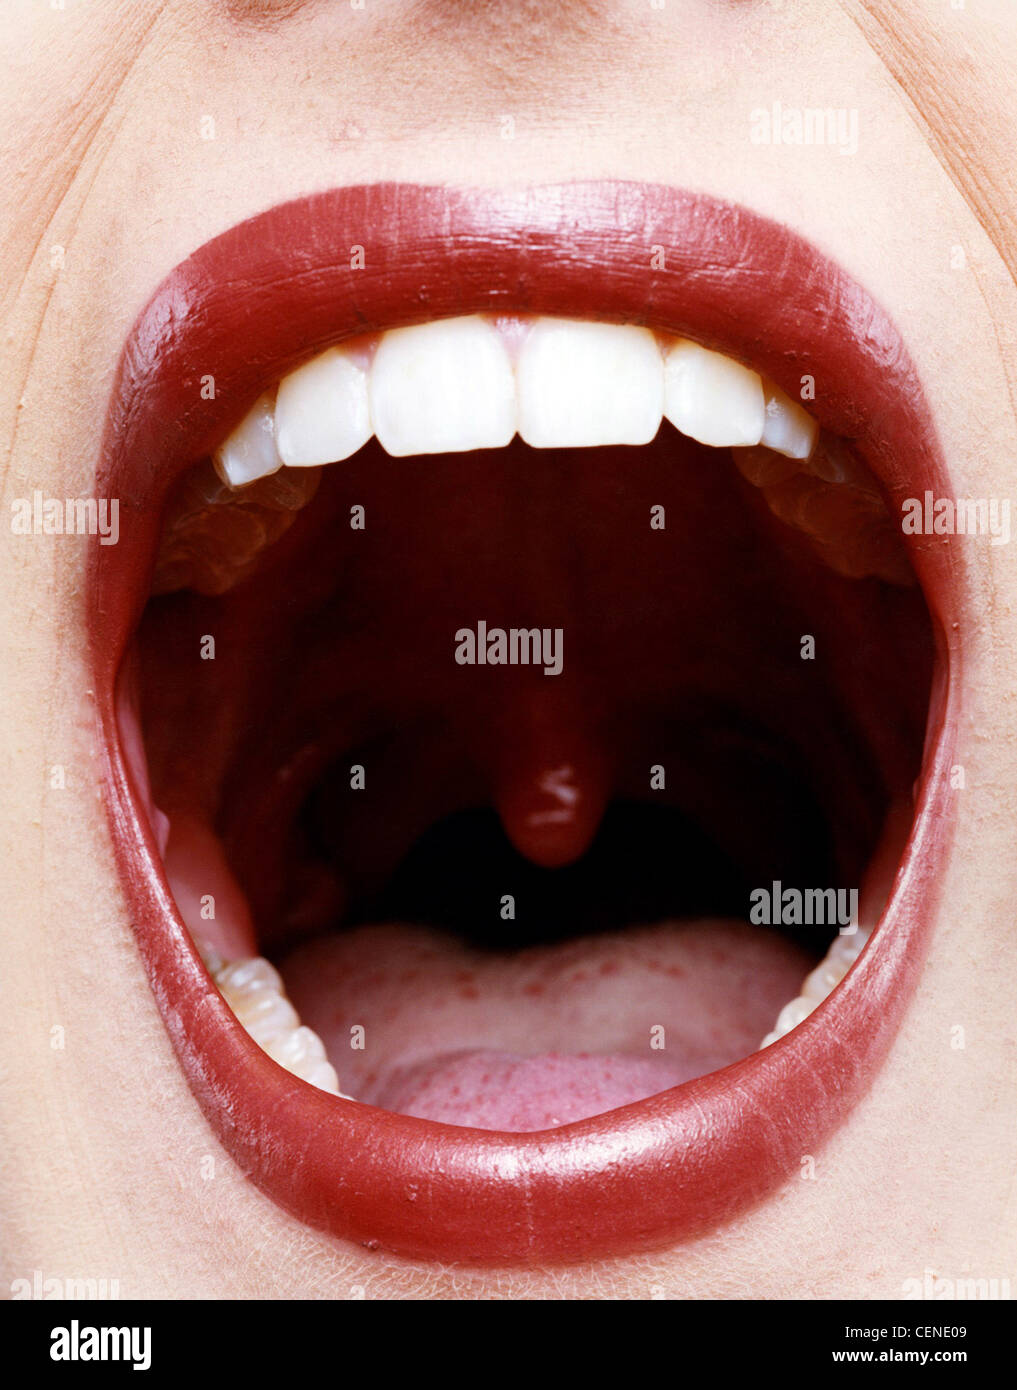 Close up image of female's open mouth showing uvula  Wood Stock Photo